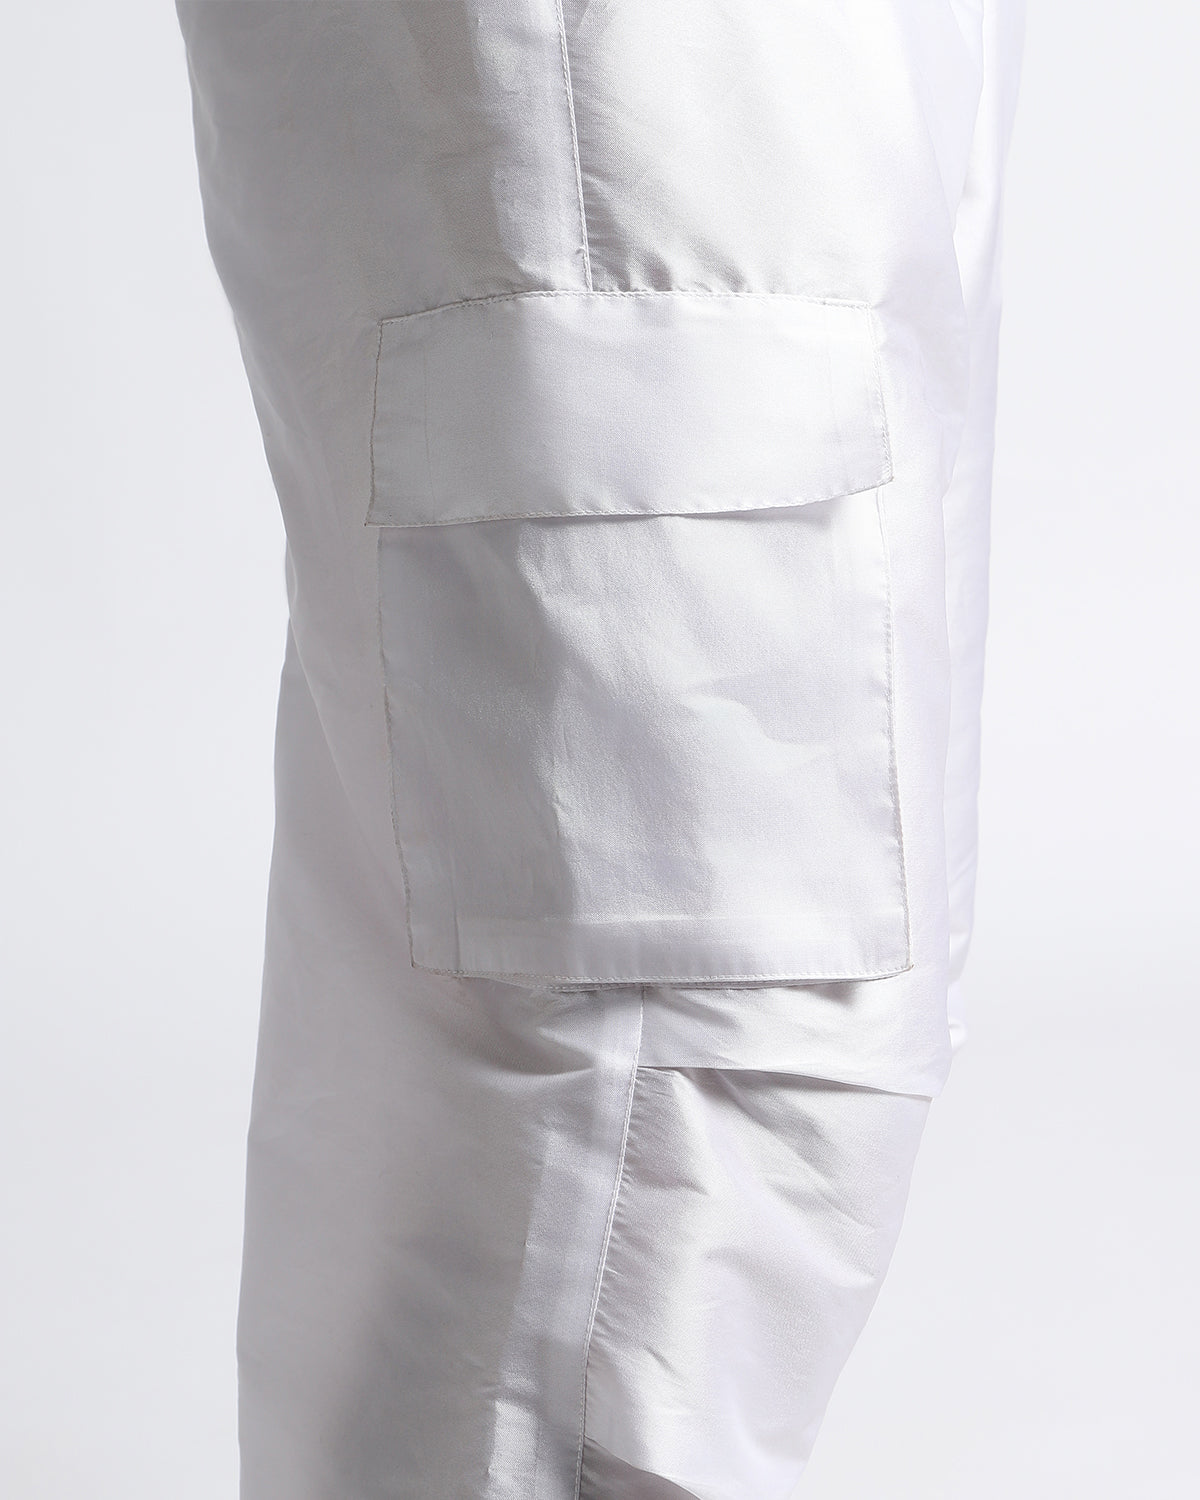 Recycled Parachute Cargo Pants-White